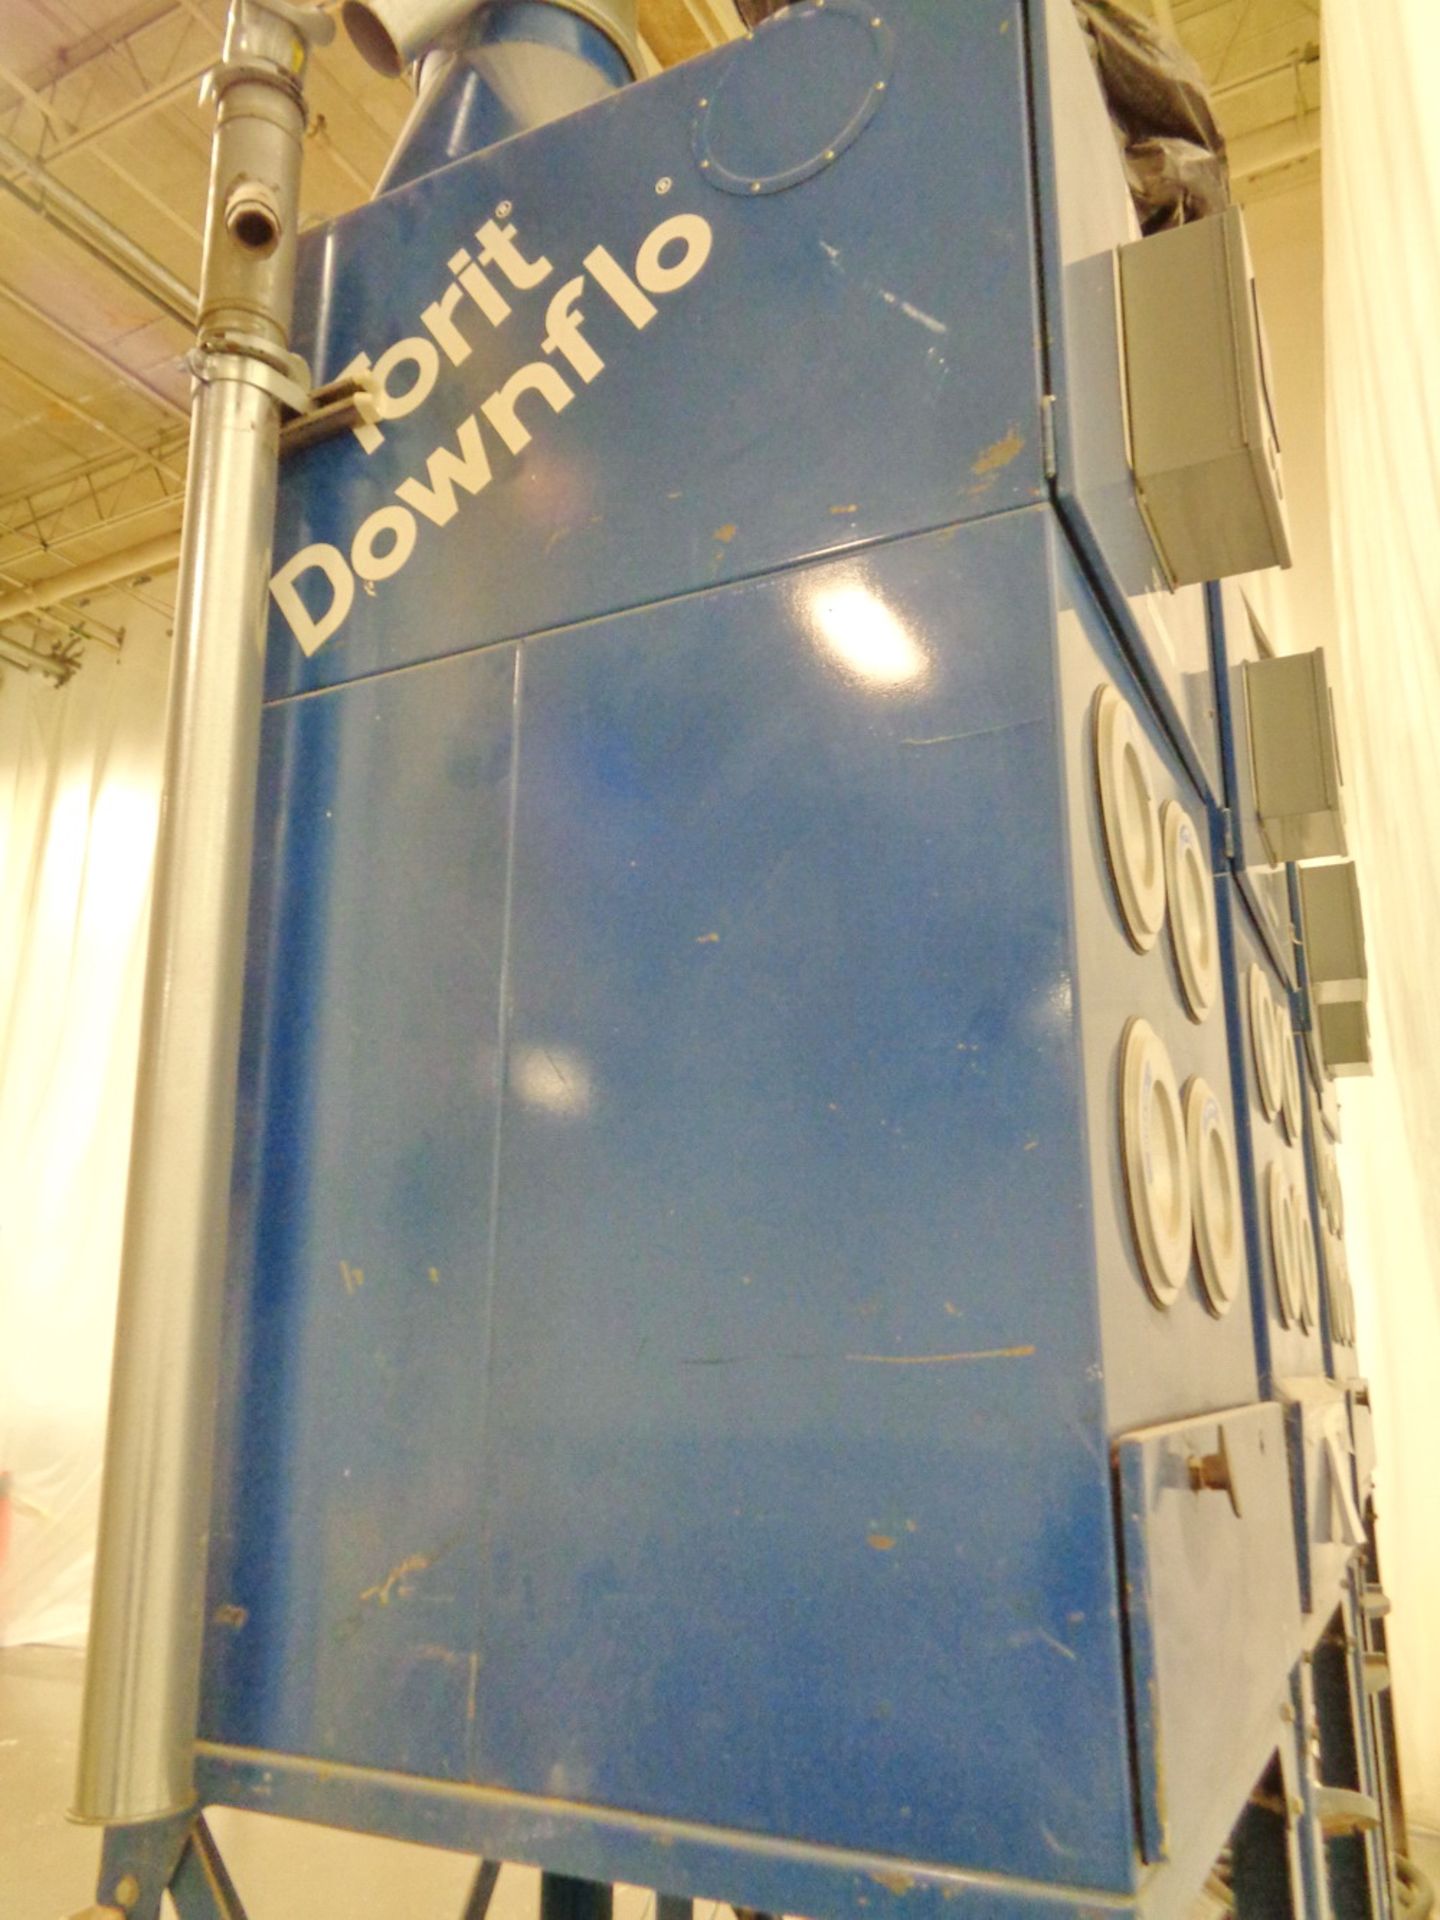 Torit Downflo Cartridge Dust Collector, Model SDF-4, S/N IG554537-0001 (Unit #12) - Image 3 of 11